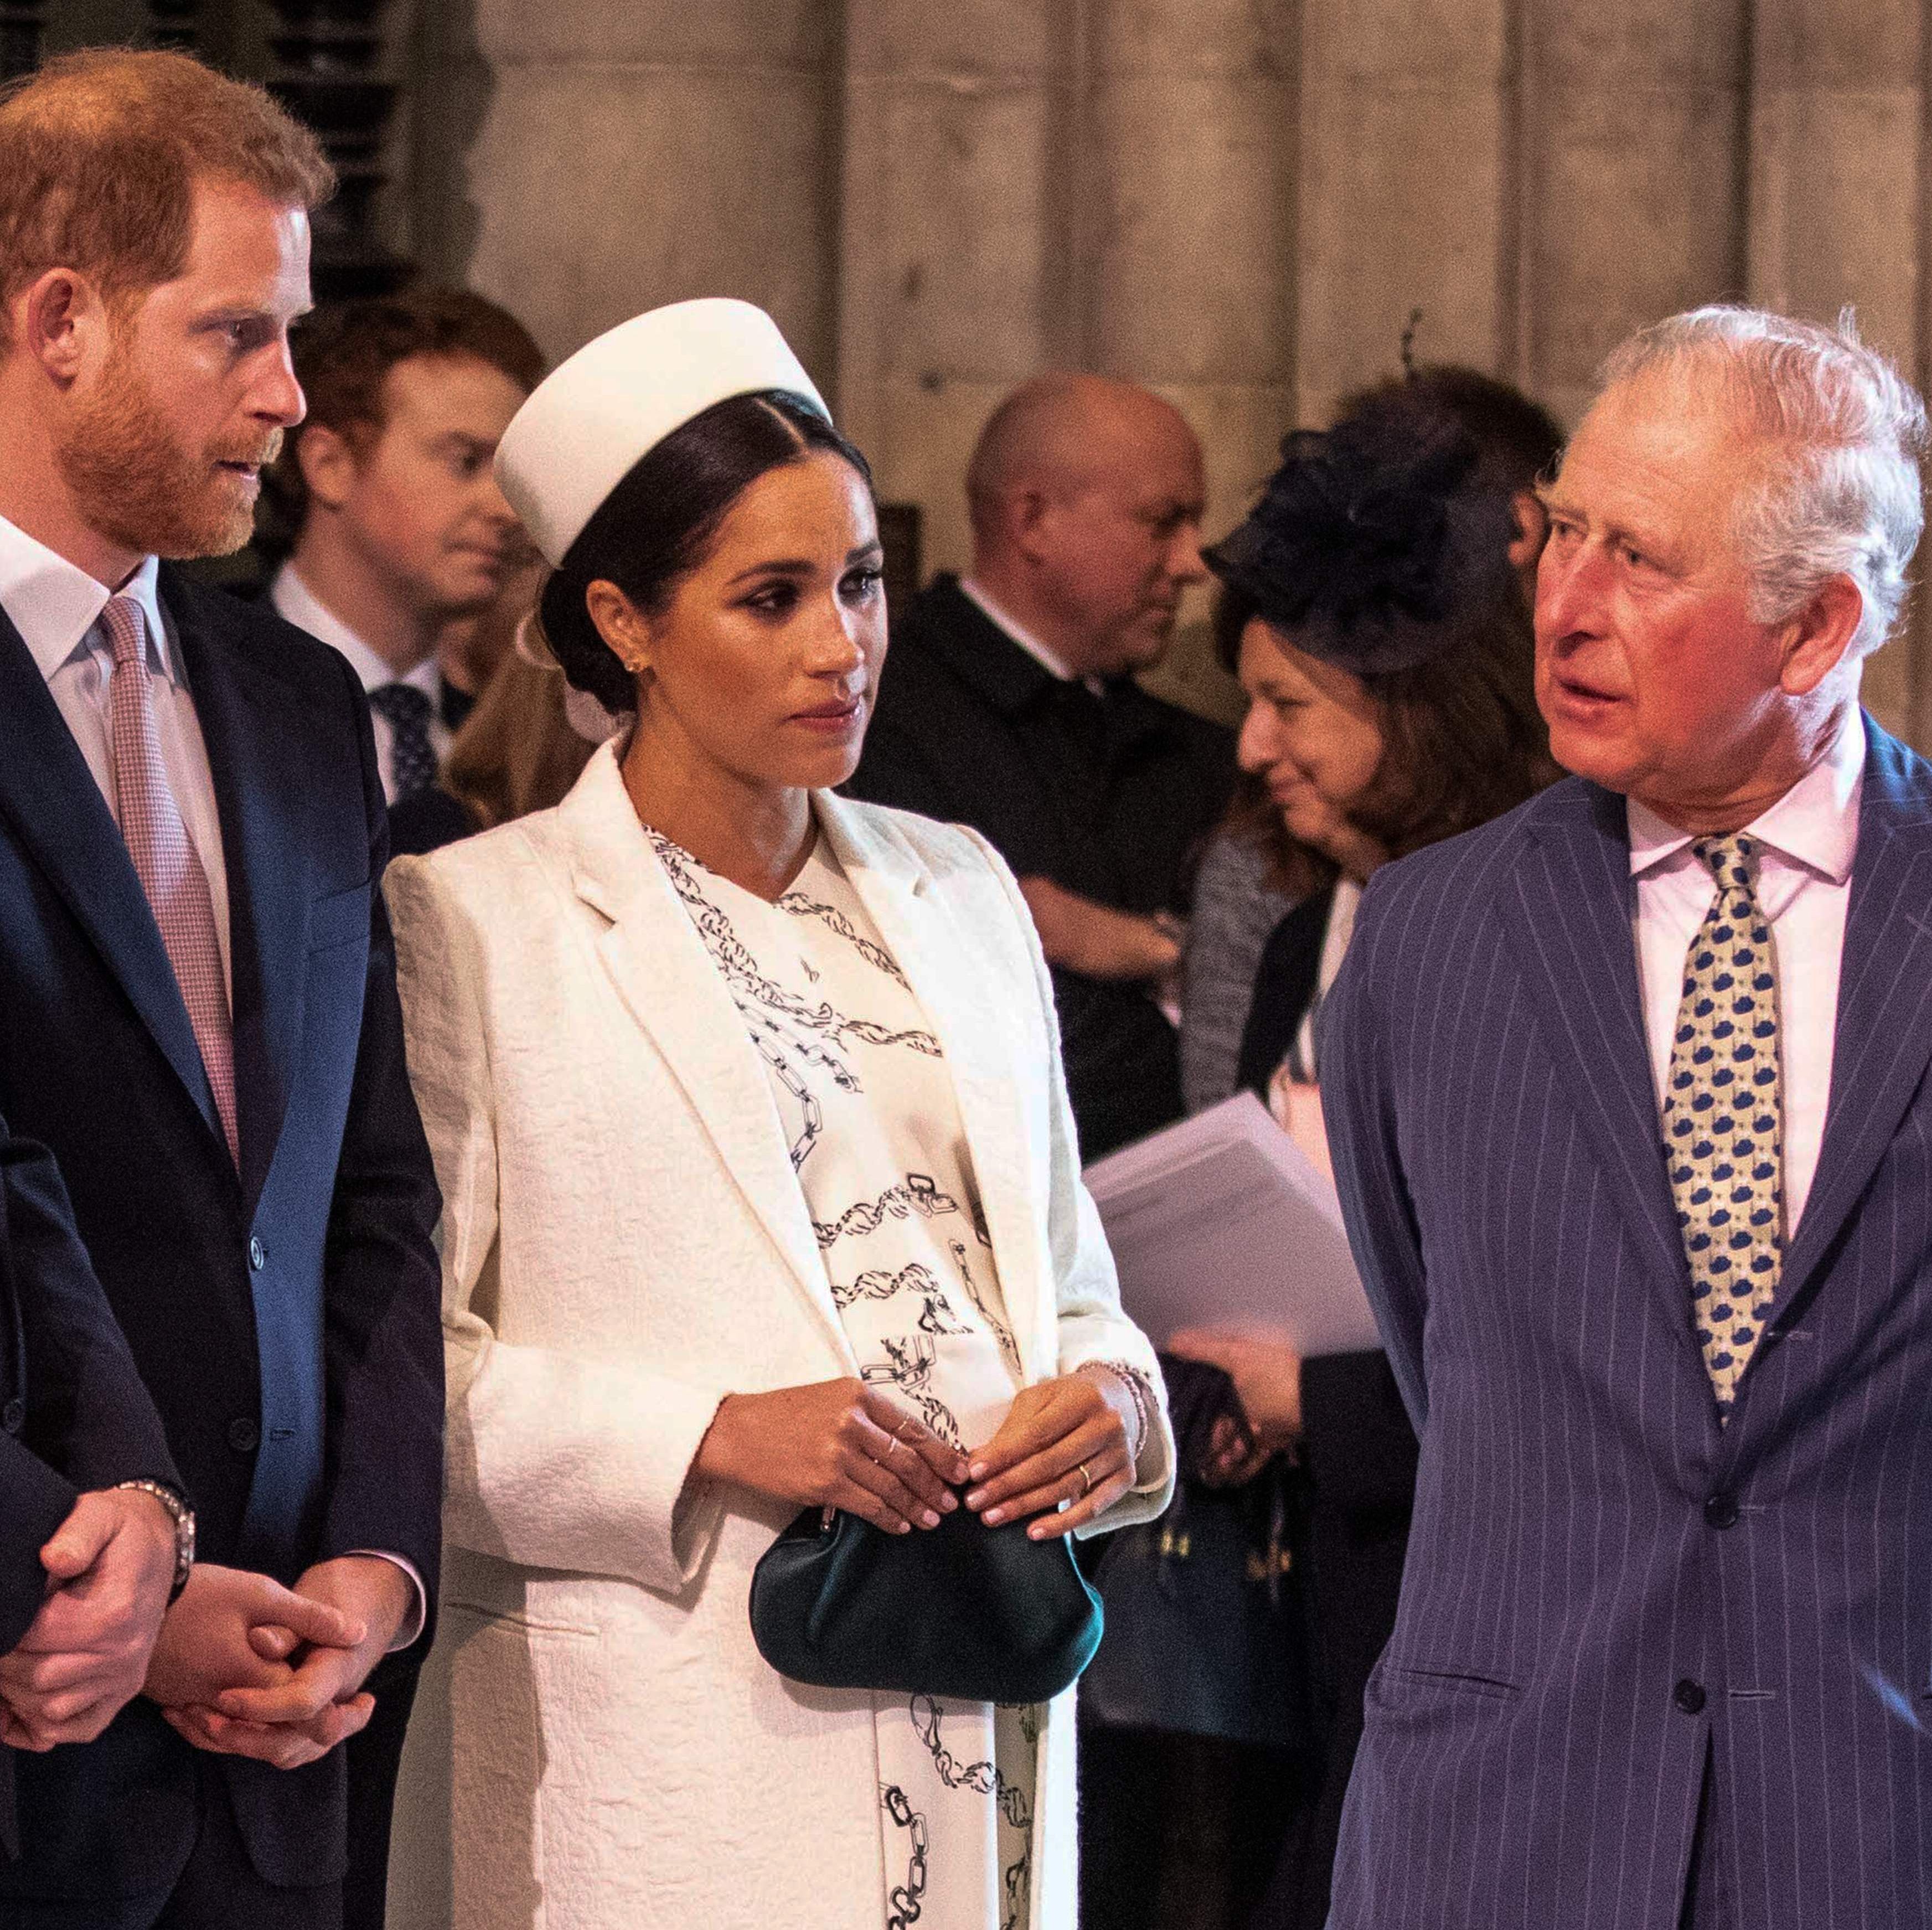 Prince Charles Would Be Better Off Letting Harry and Meghan Be Part-Time Royals, Expert Says